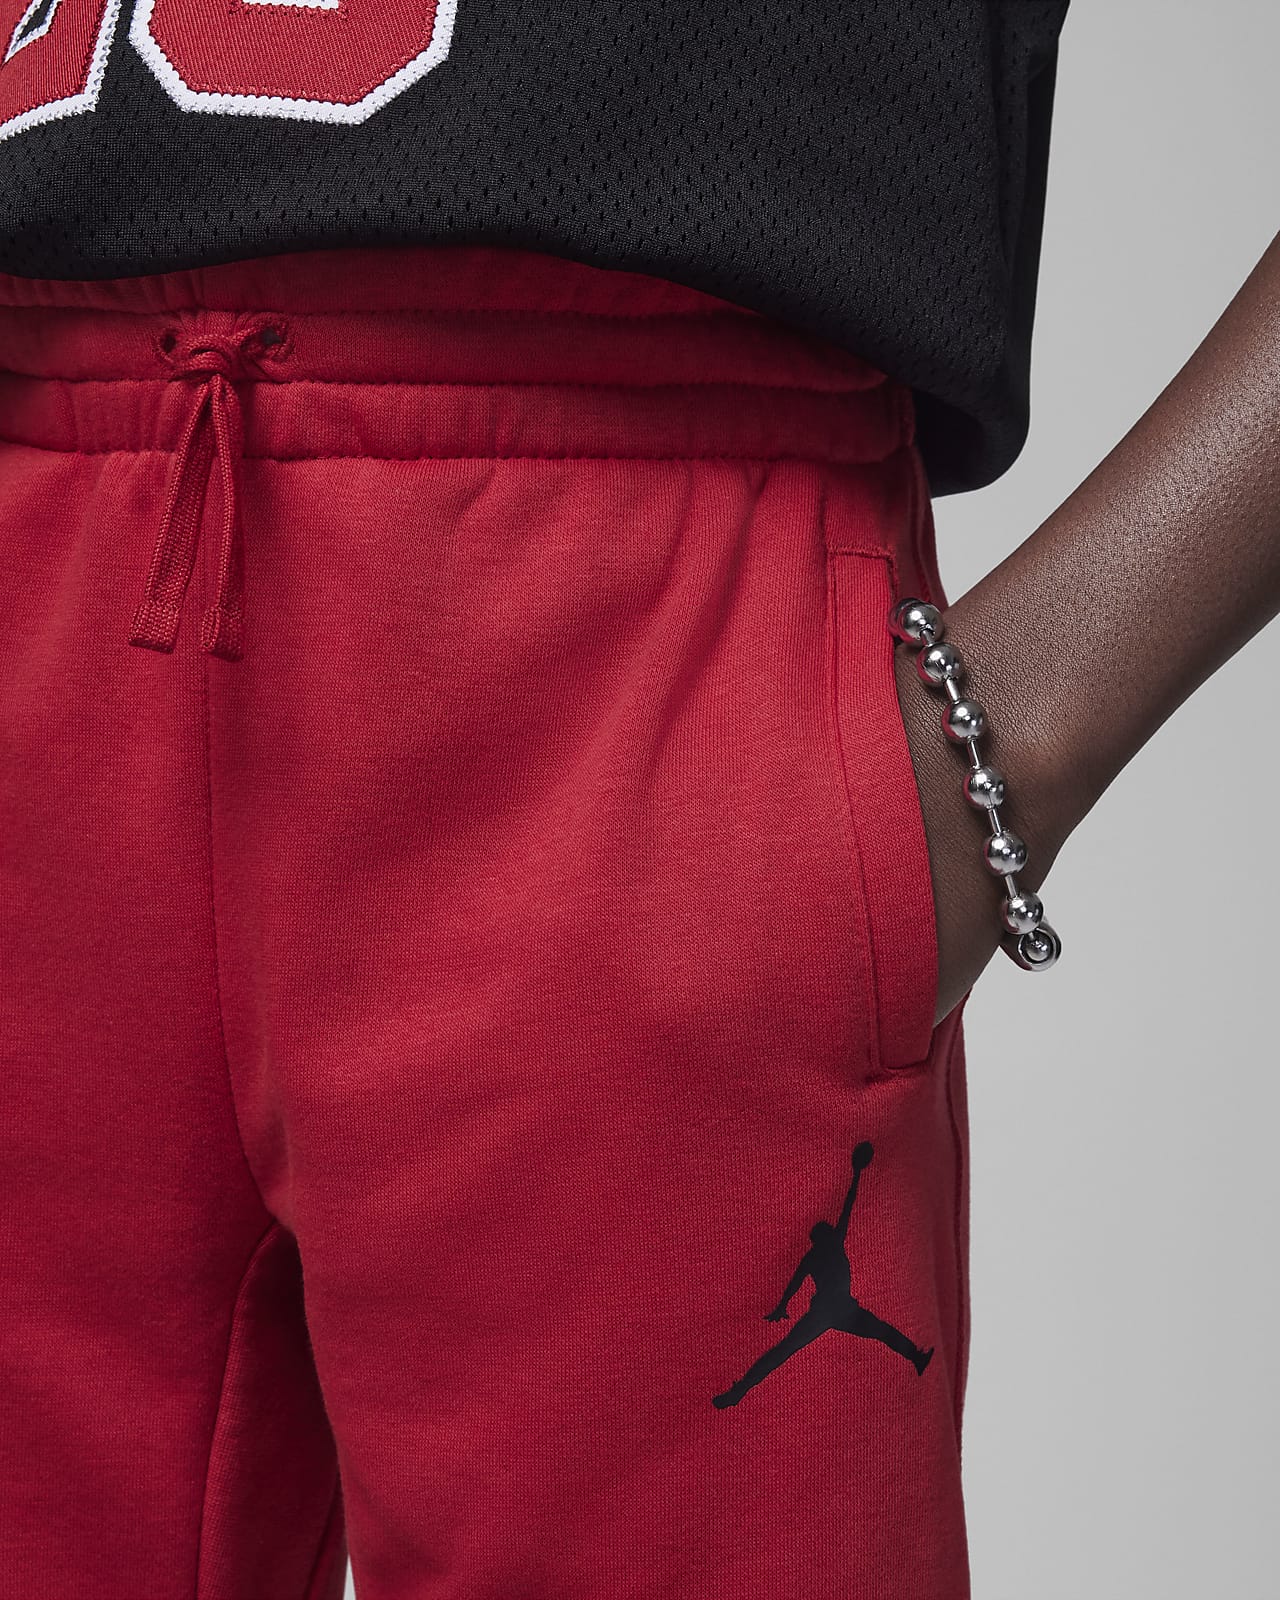 Nike Sportswear Tech Fleece Joggers - GYM RED/BLACK - Civilized Nation -  Official Site